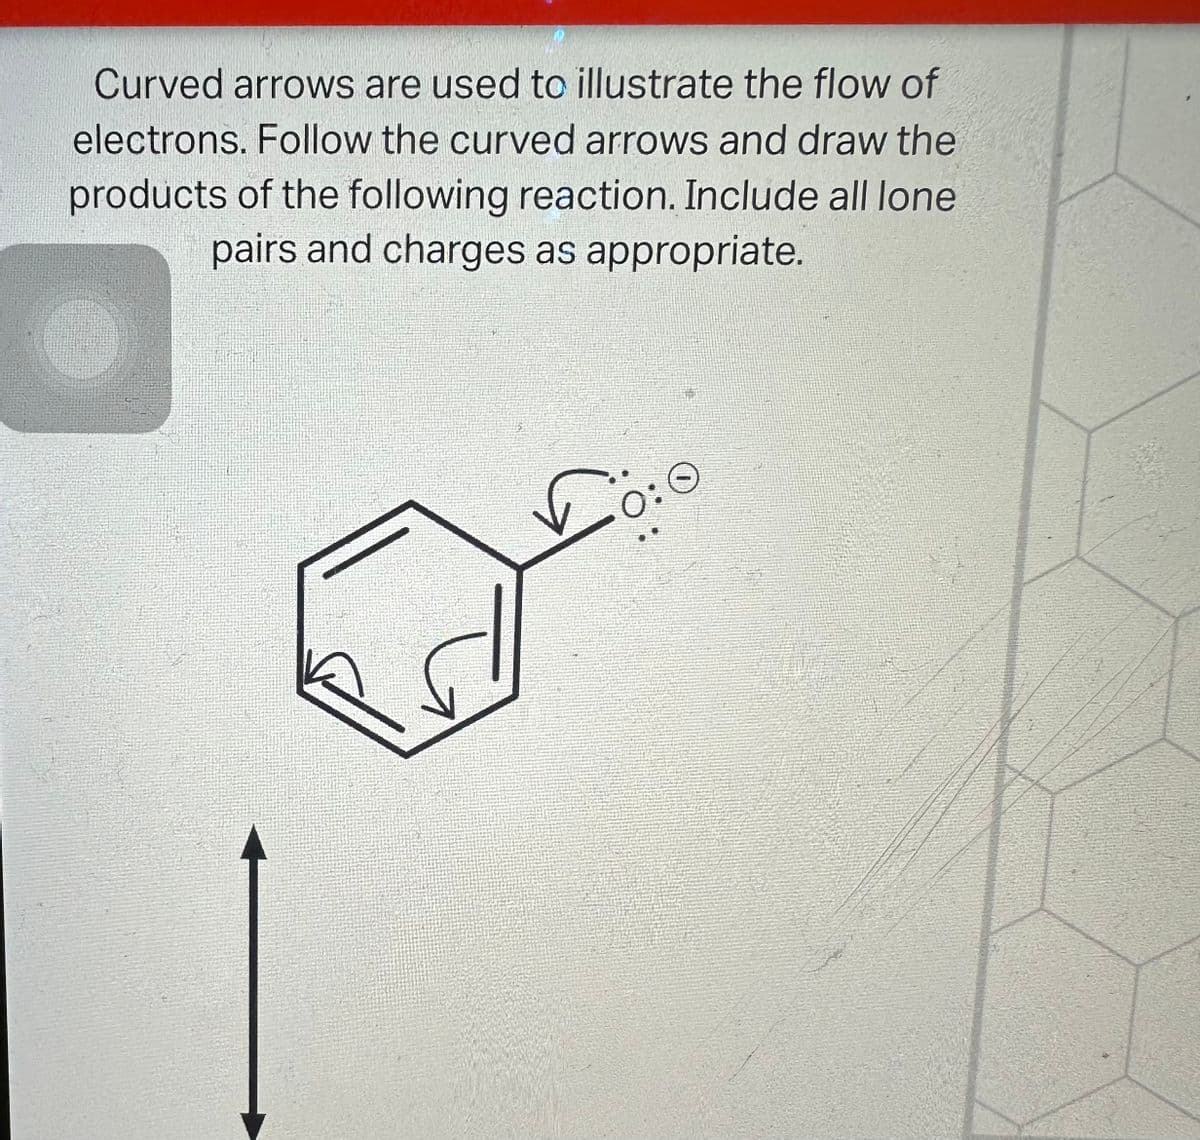 Curved arrows are used to illustrate the flow of
electrons. Follow the curved arrows and draw the
products of the following reaction. Include all lone
pairs and charges as appropriate.
0: